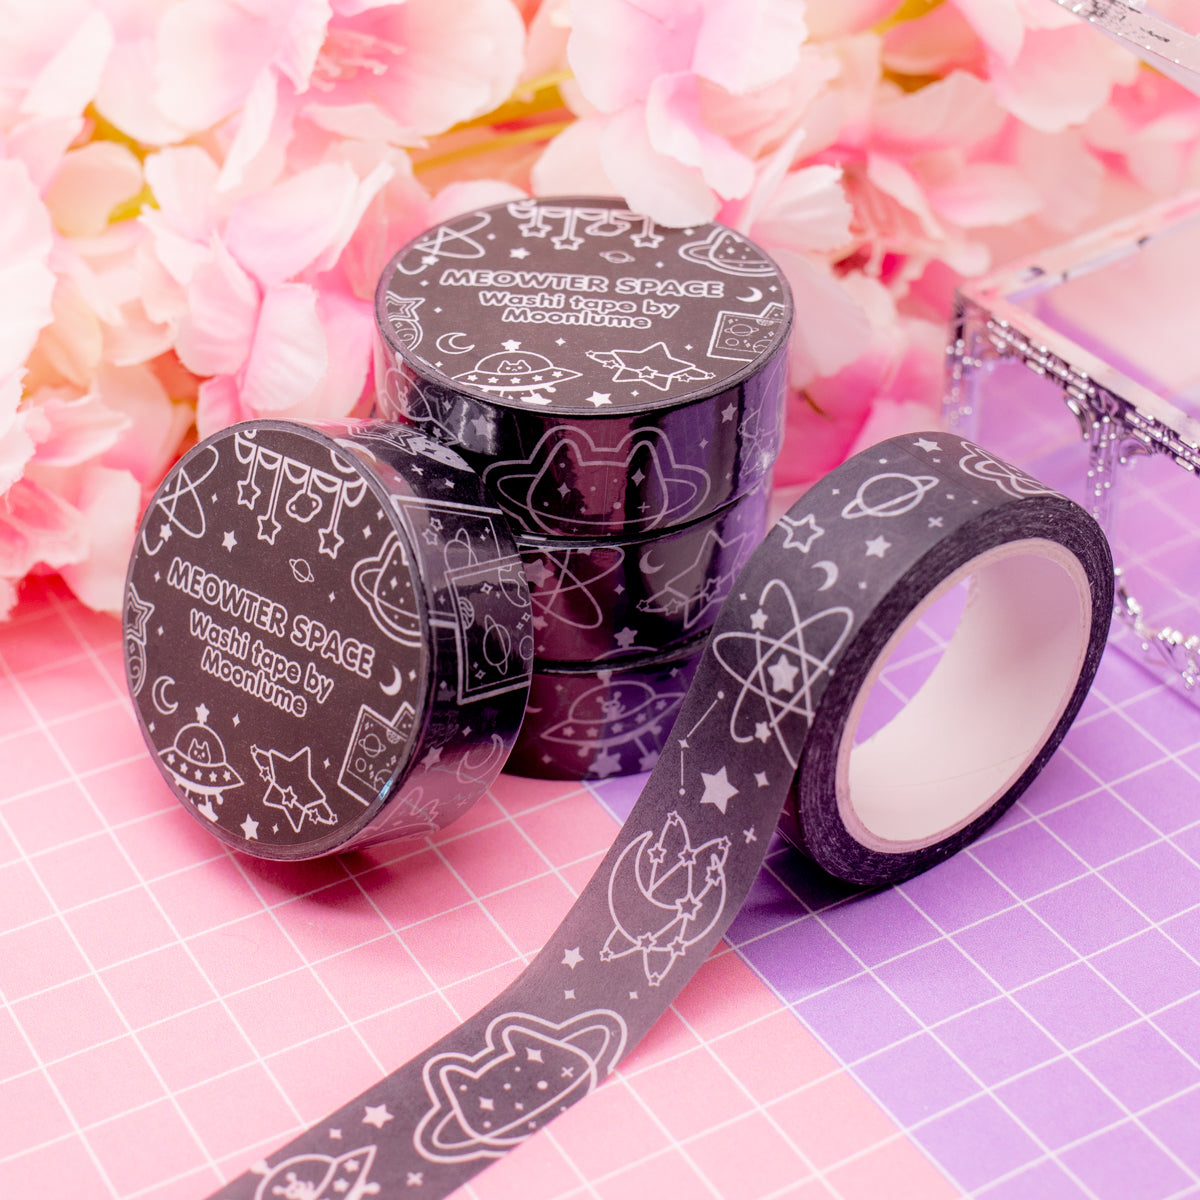 Meowter Space - space cat themed washi tape